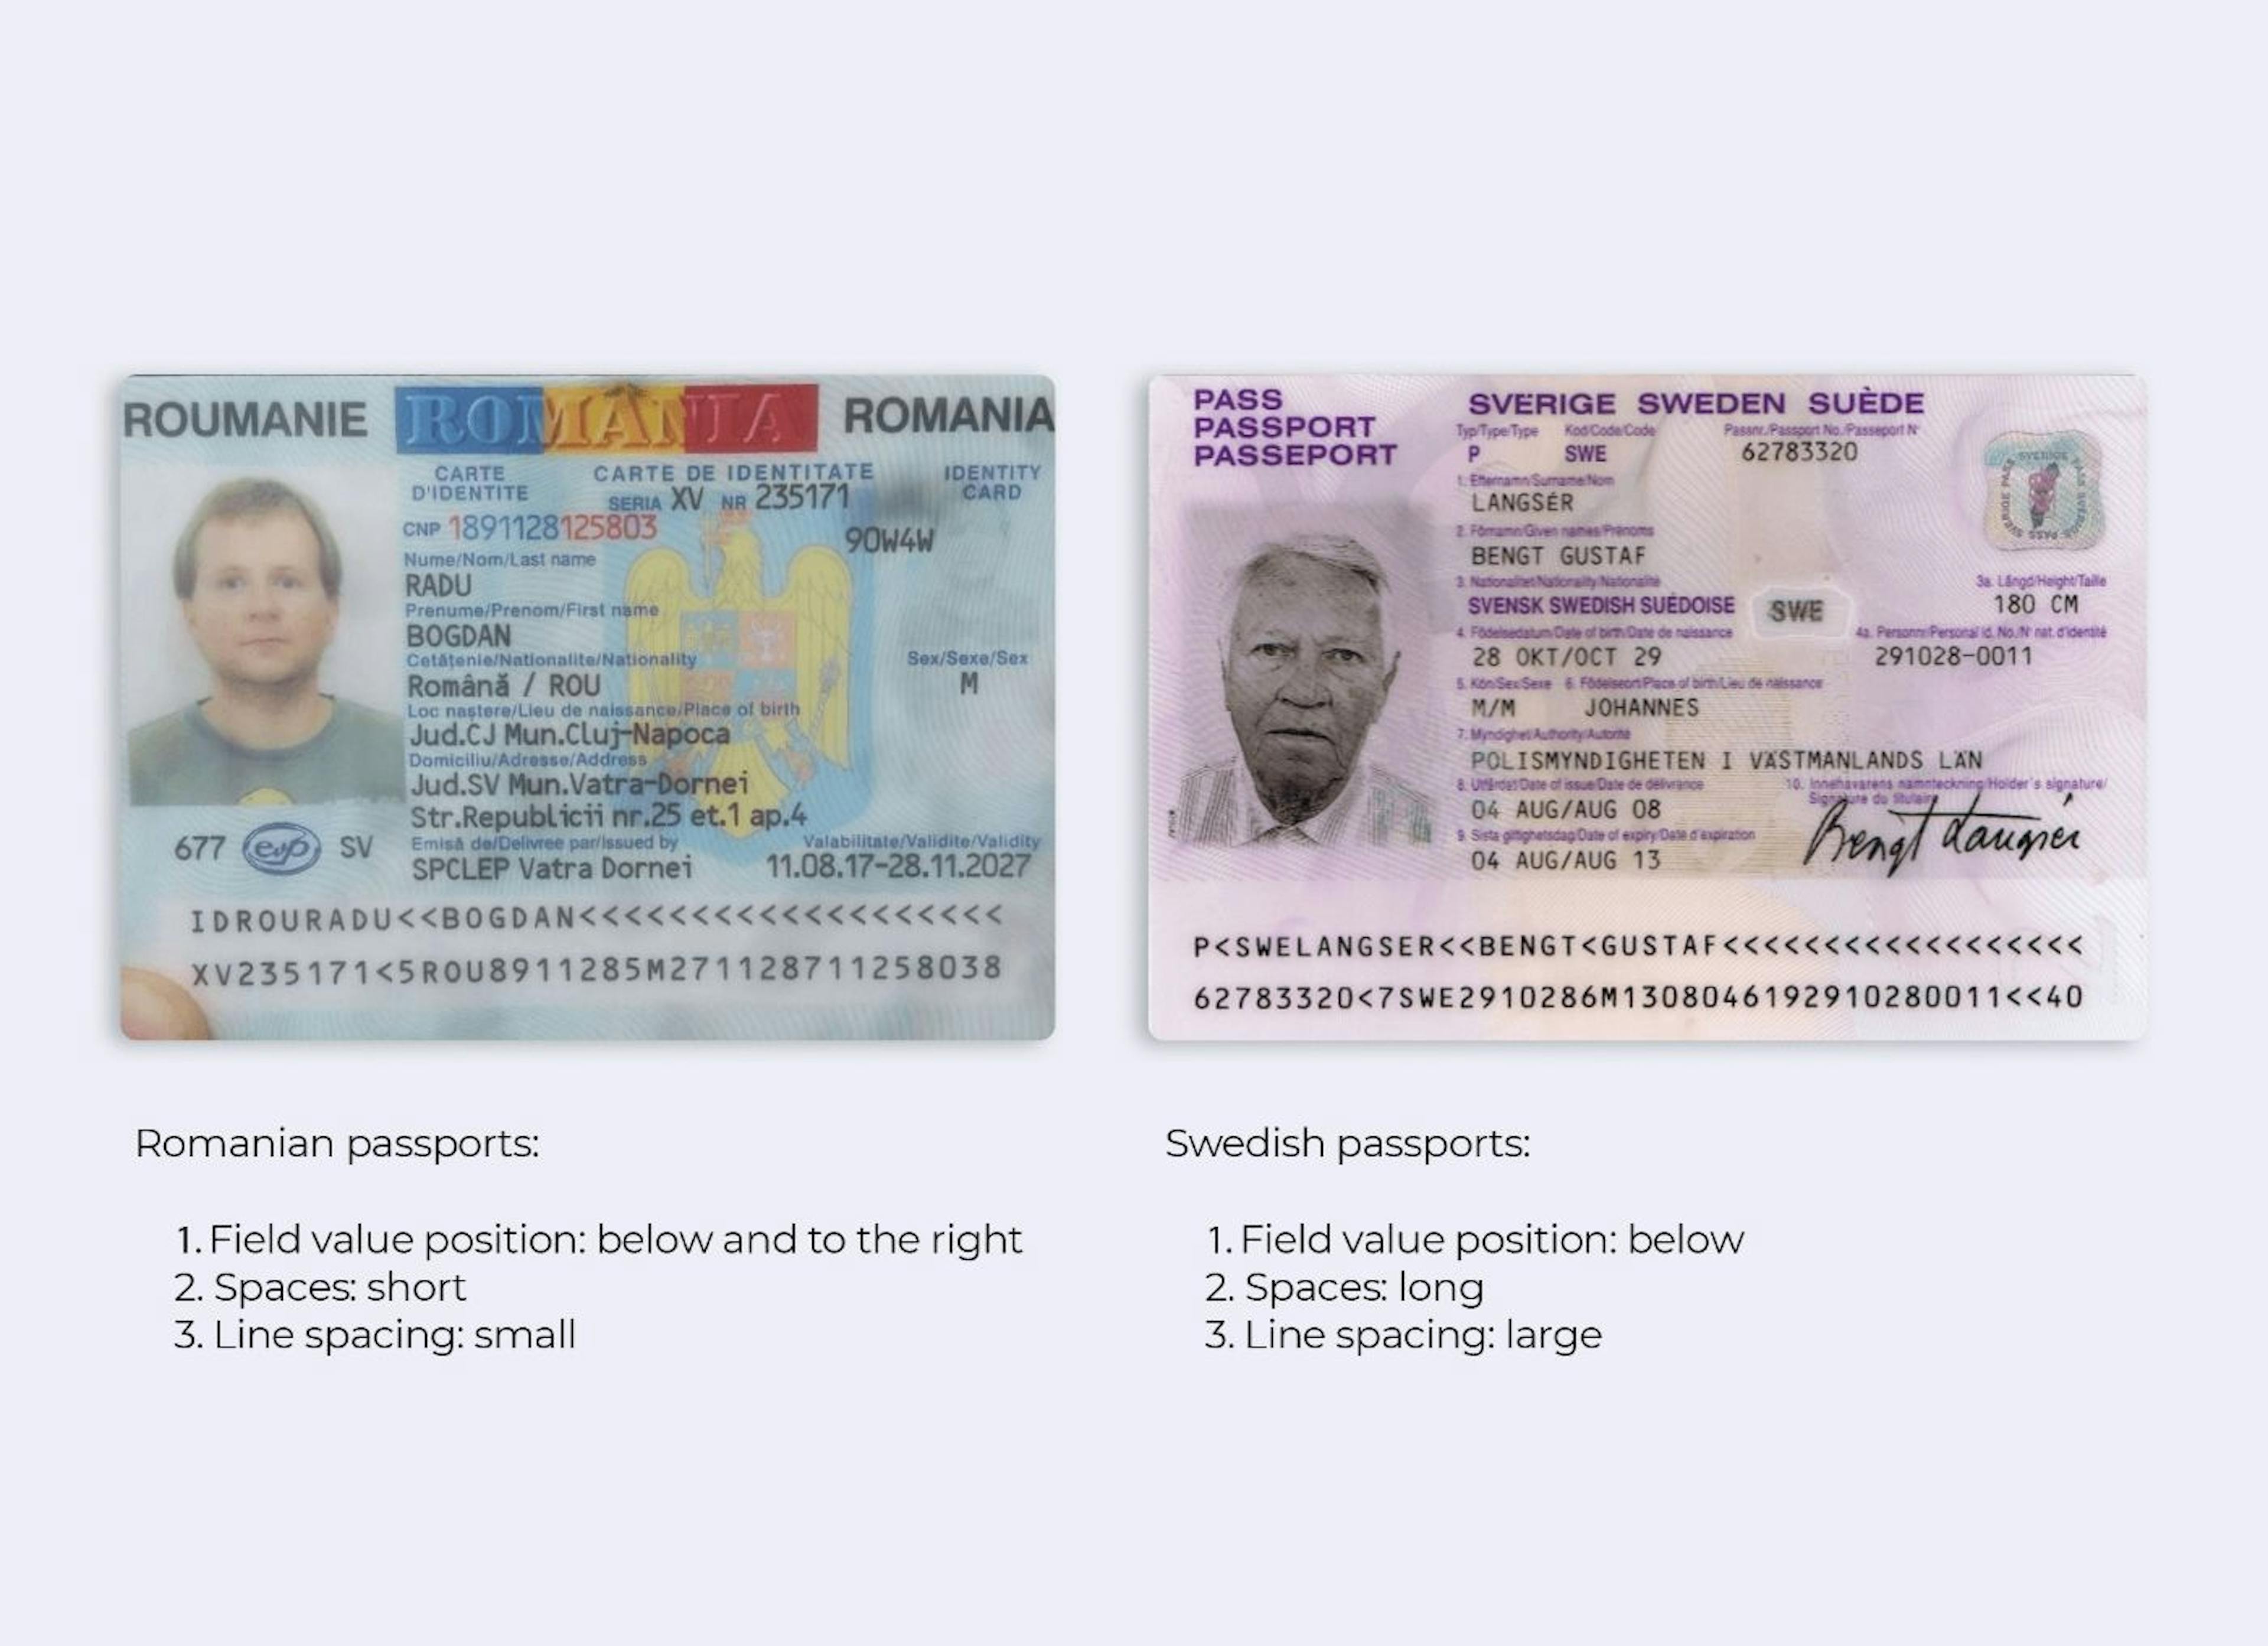 The difference in line spacing and spaces between Romanian and Swedish IDs